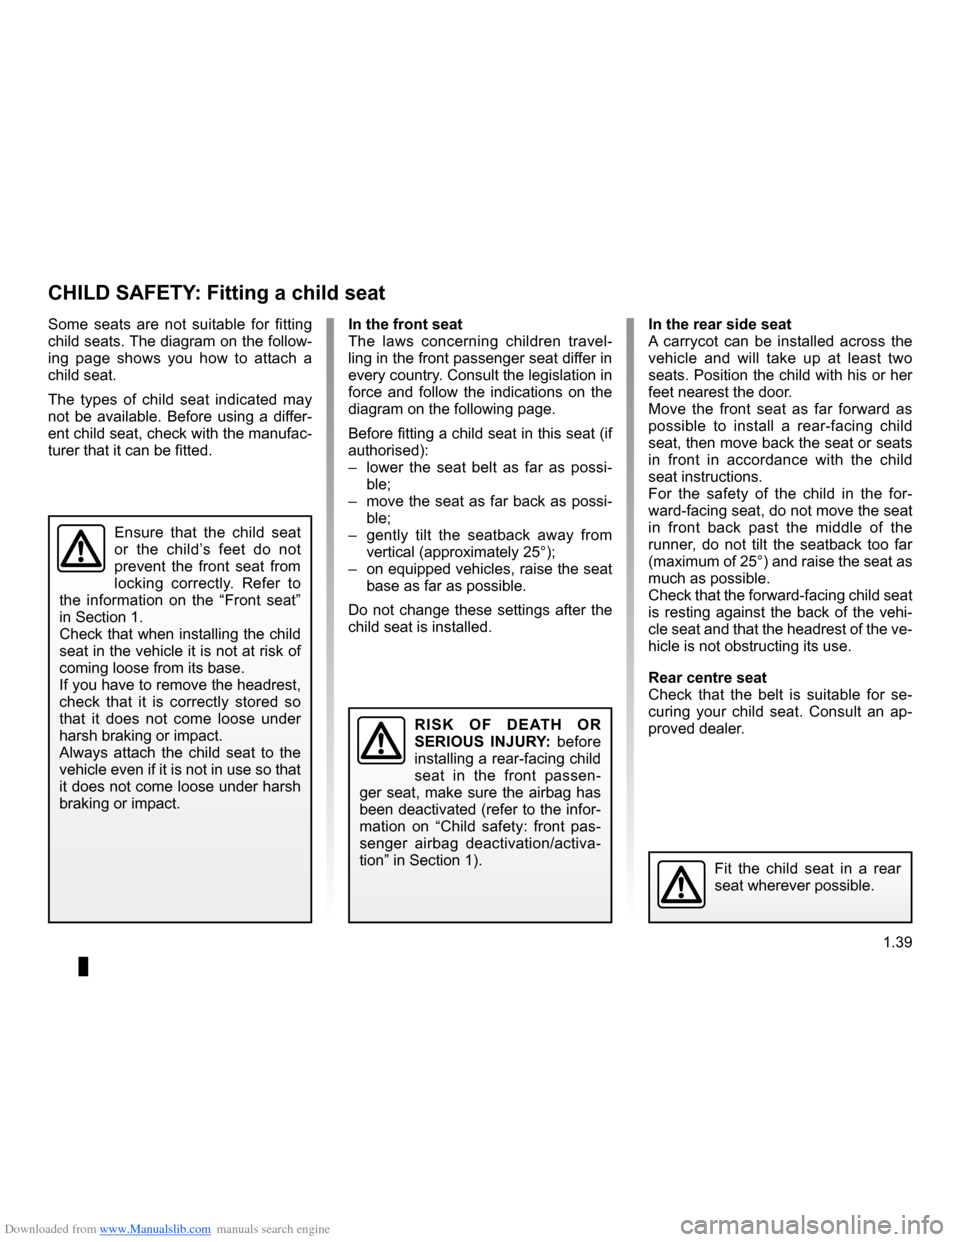 RENAULT CLIO 2009 X85 / 3.G User Guide Downloaded from www.Manualslib.com manuals search engine 
child restraint/seat ................................(up to the end of the DU)child restraint/seat  ................................(up to the